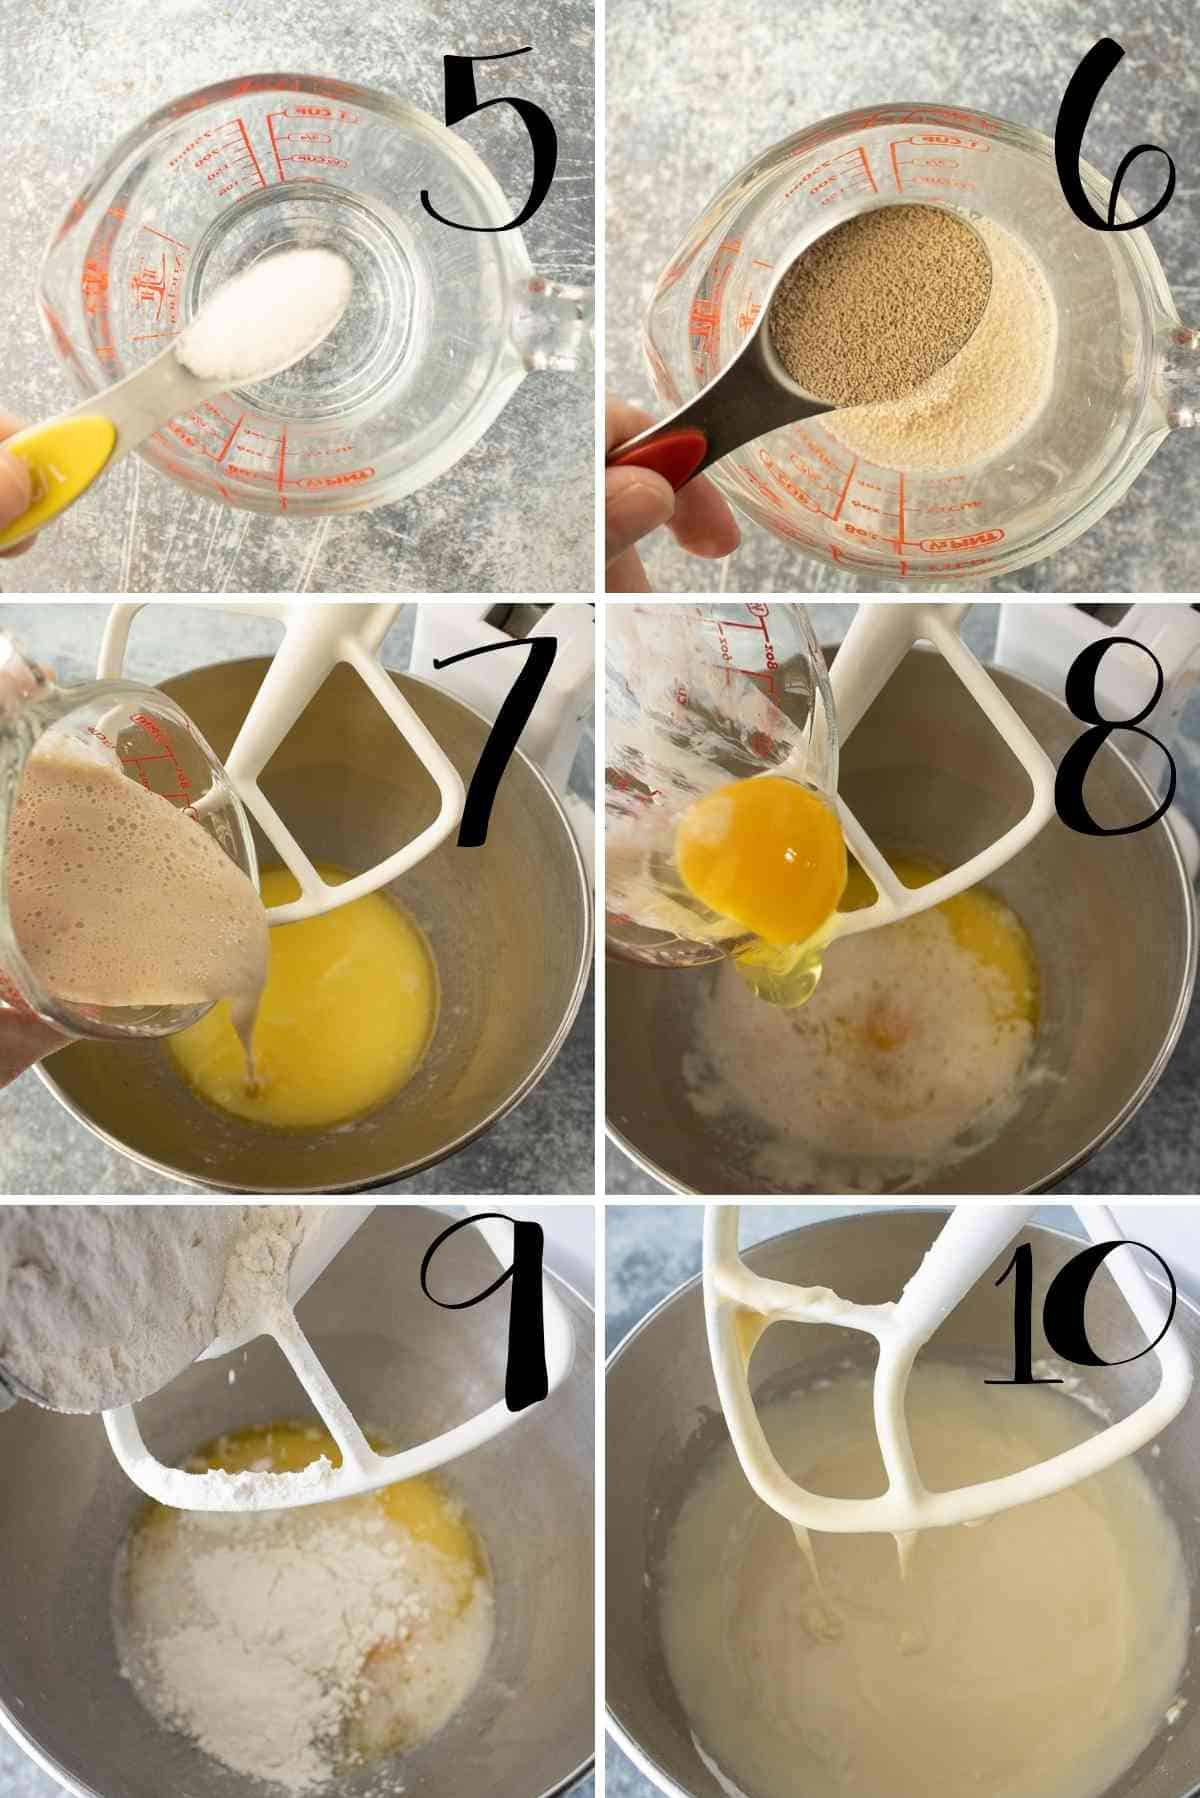 Add yeast mixture, eggs and some flour to make a the batter dough.